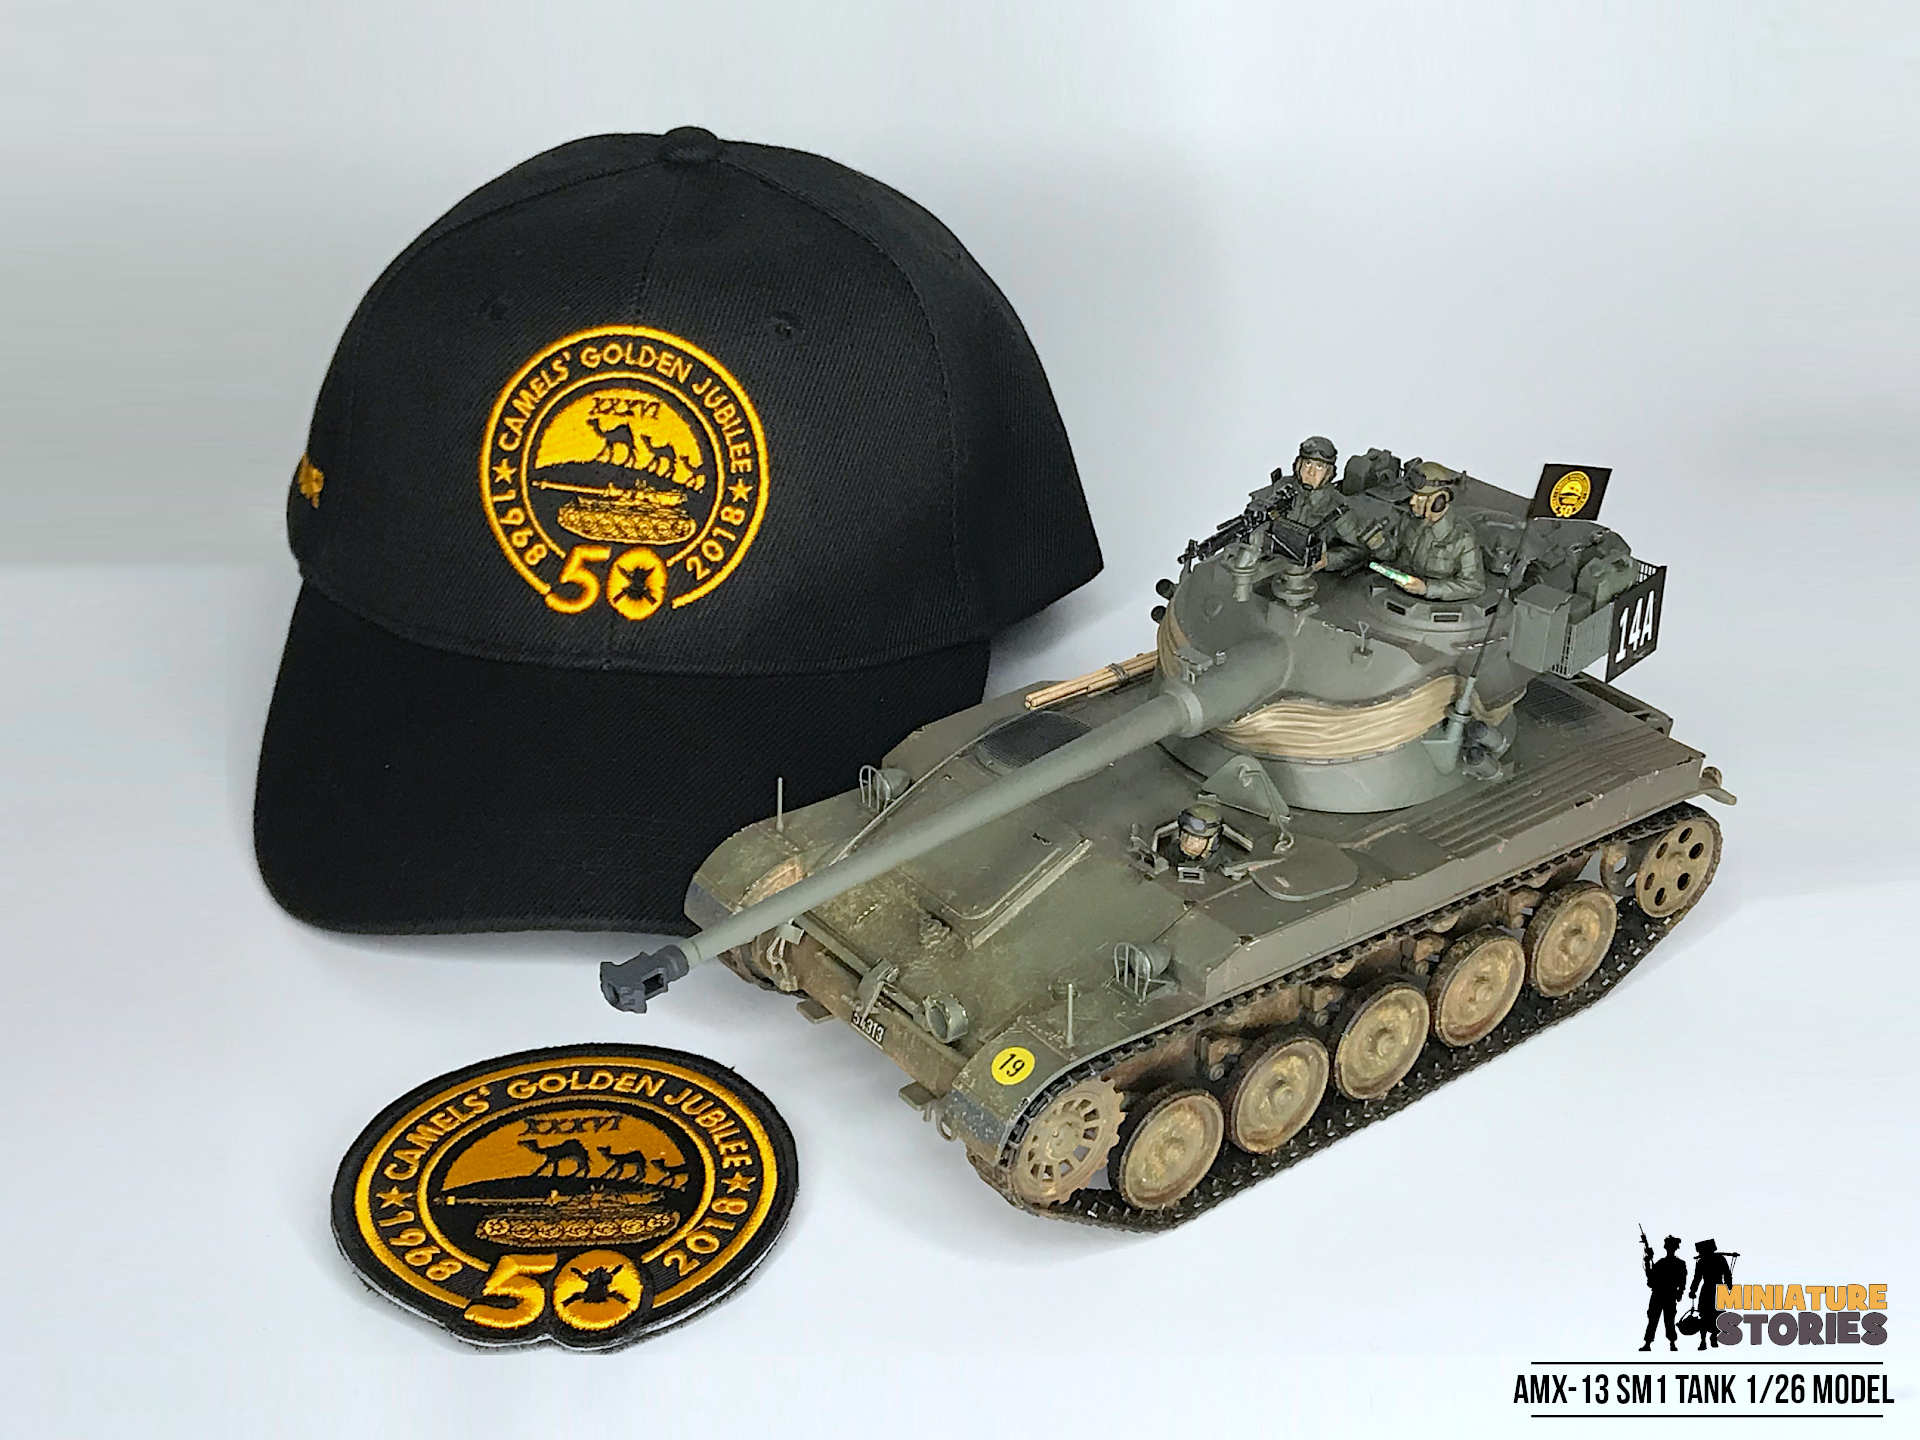 Miniature Stories AMX-13 SM1 Tank Model with Camels 50 Cap and Patch